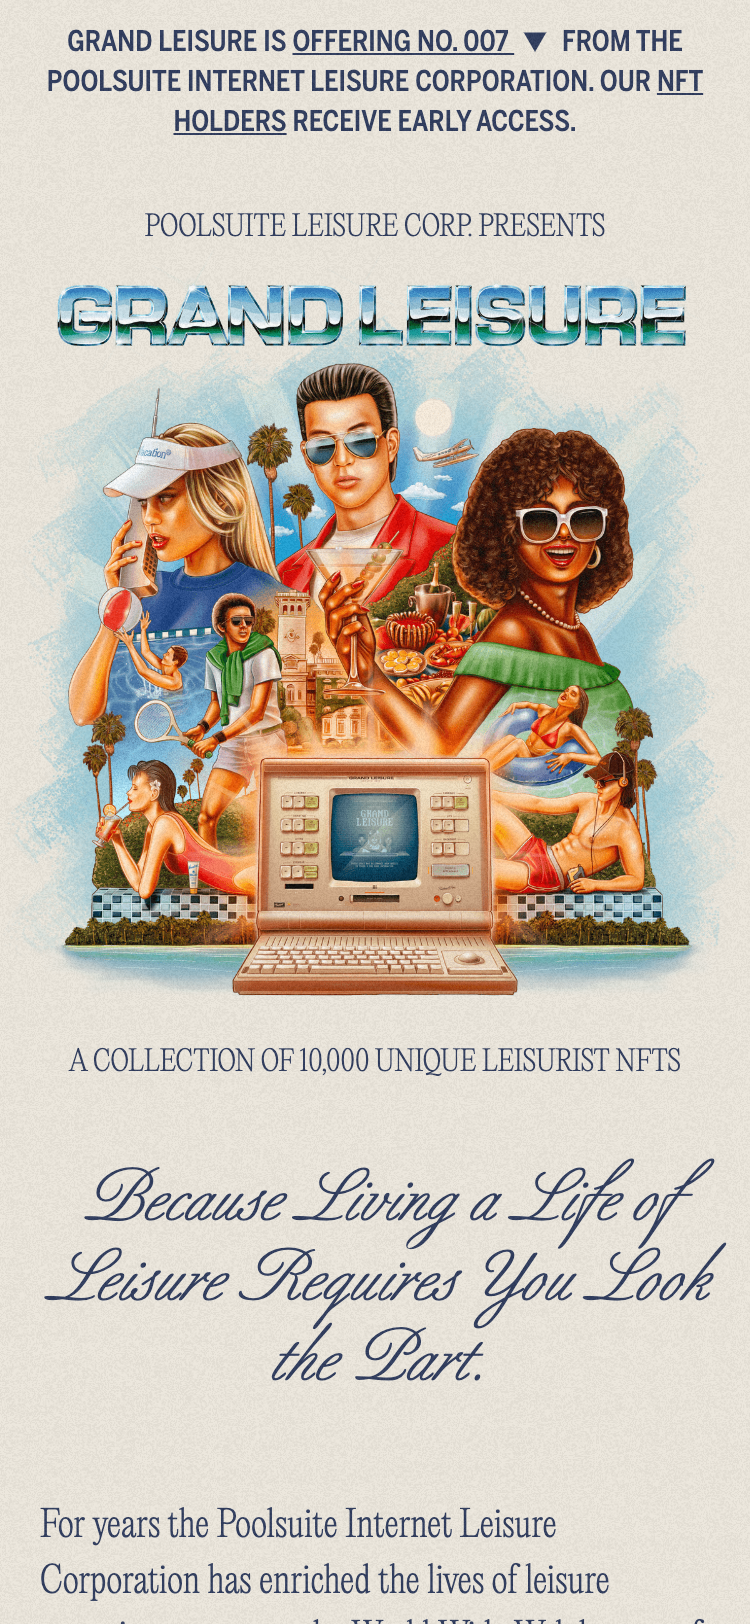 Mobile screenshot of the Poolsuite Grand Leisure website. 'GRAND LEISURE' is displayed across the screen in large stylized lettering. Underneath is an elaborate 90s-style illustration of rich people. Below that is a cursive style heading.